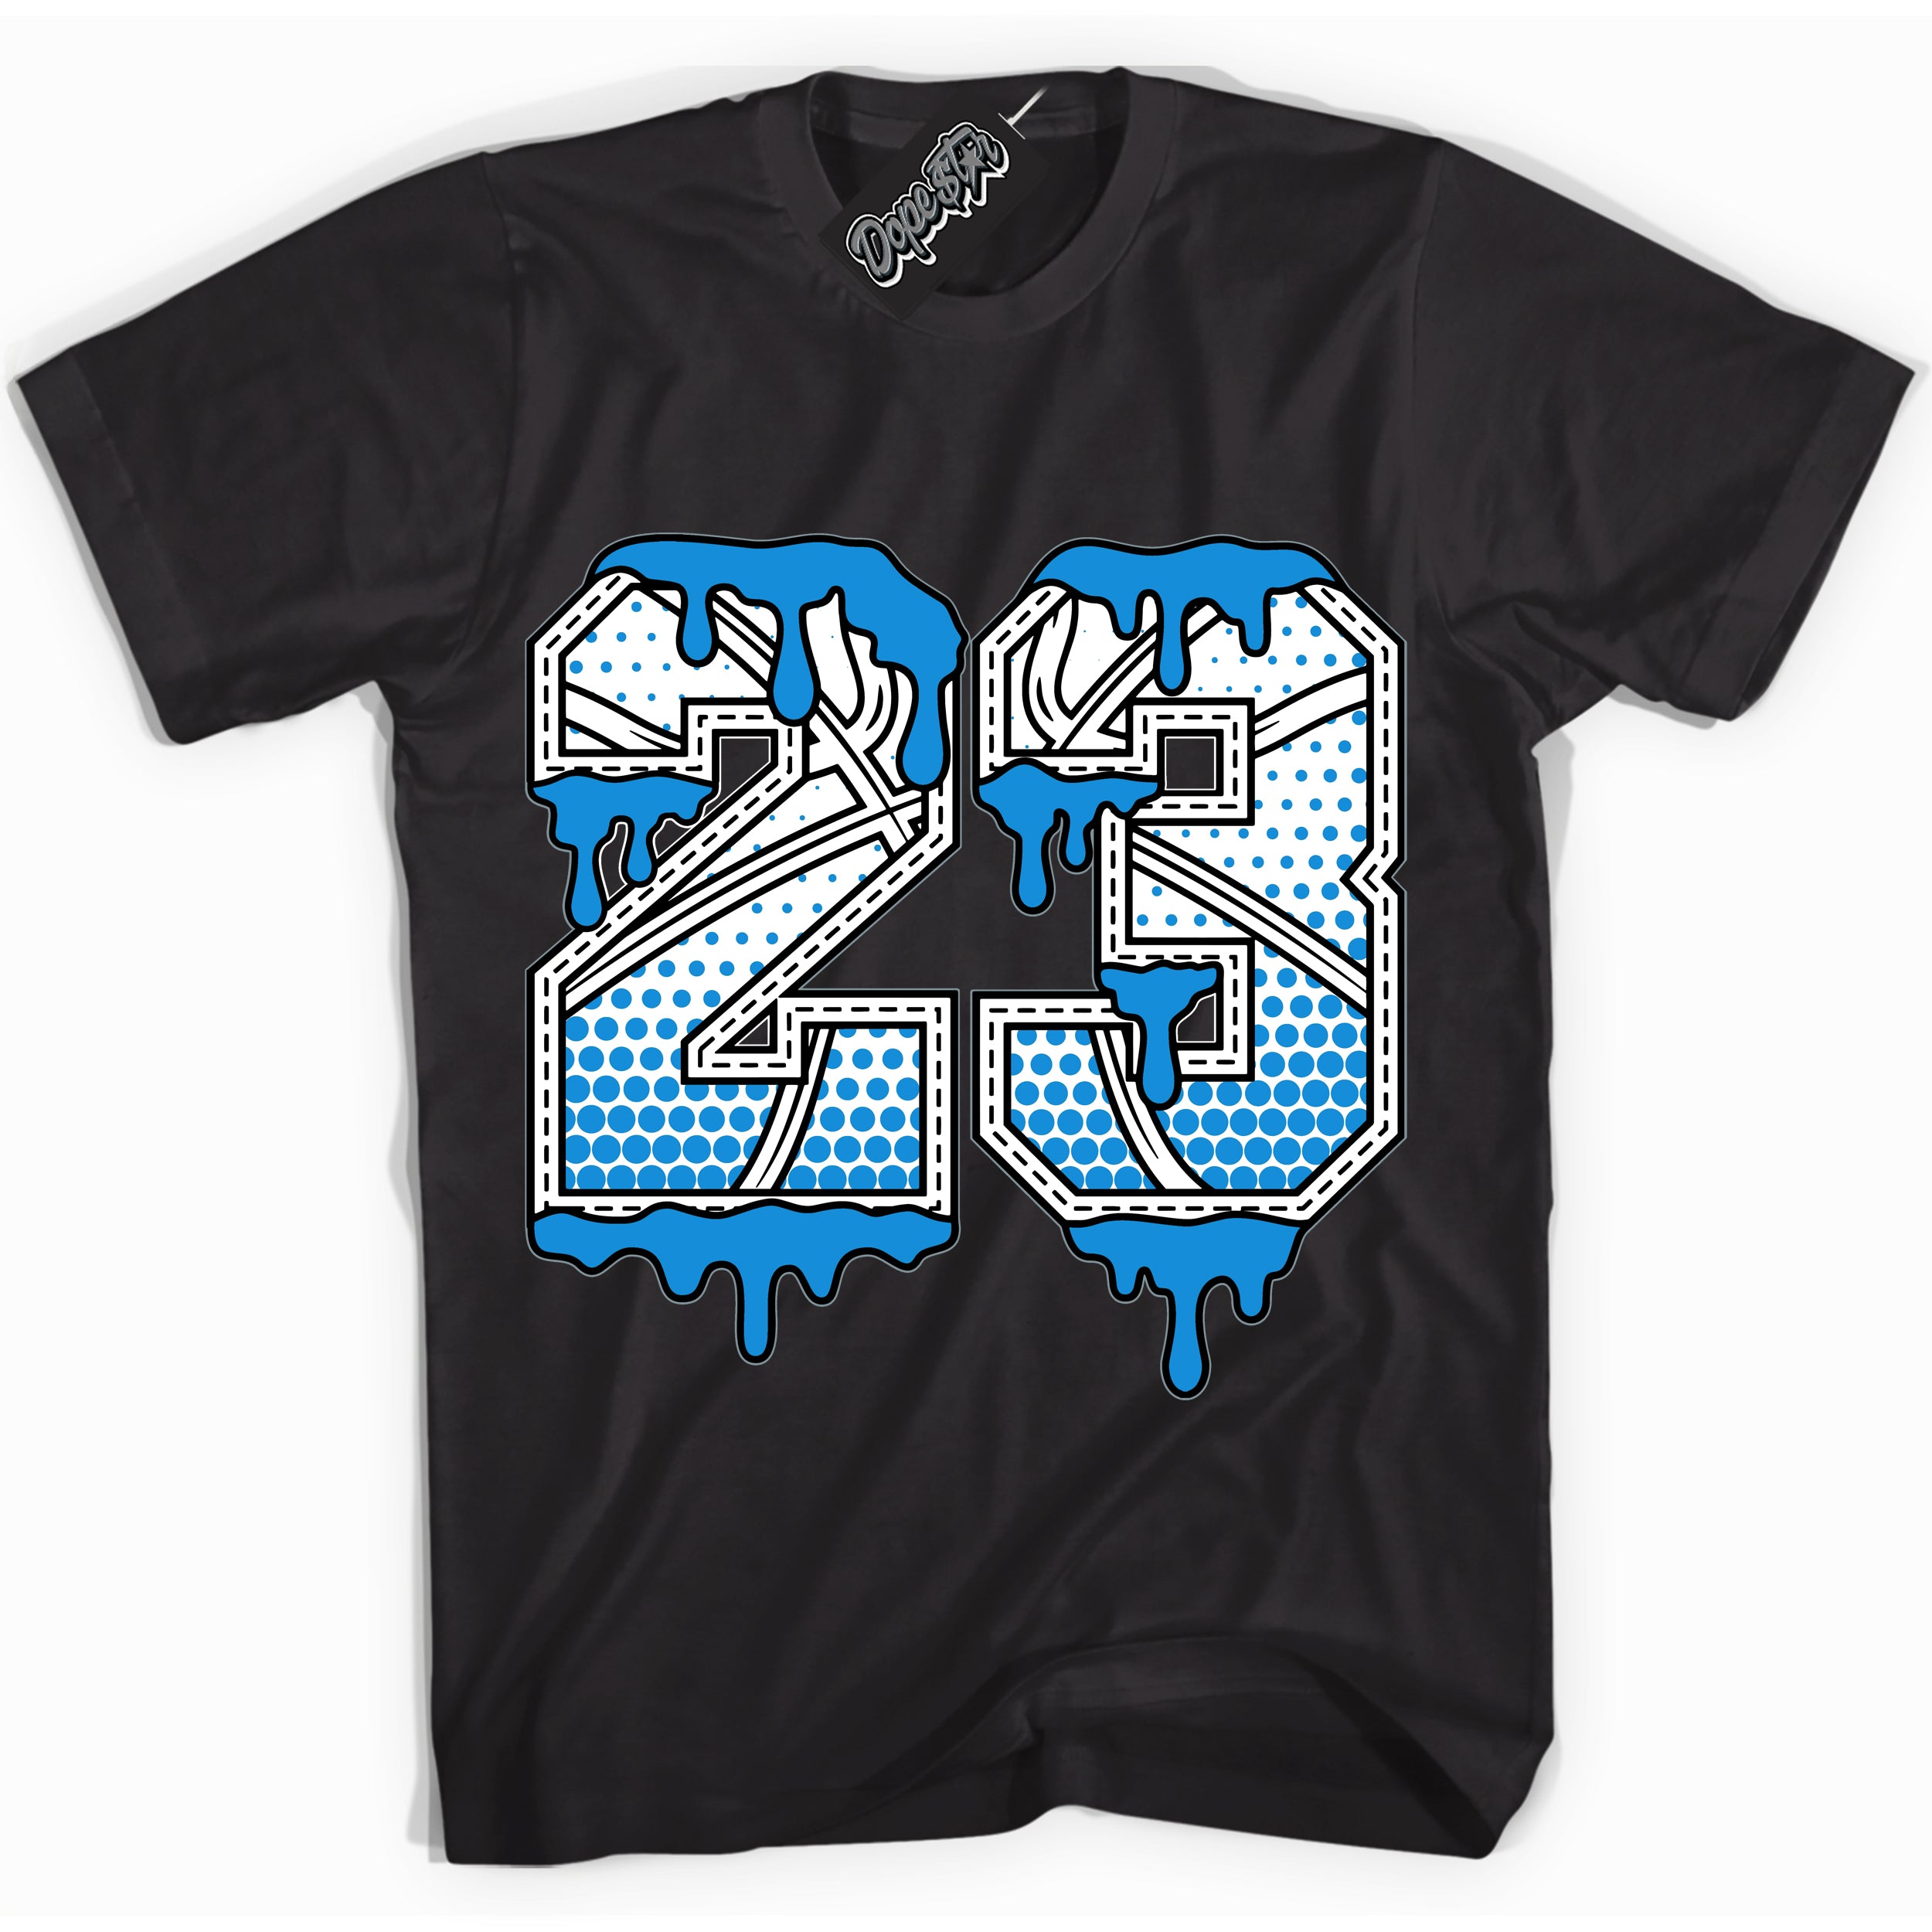 Cool Black graphic tee with “ 23 Ball ” design, that perfectly matches Powder Blue 9s sneakers 